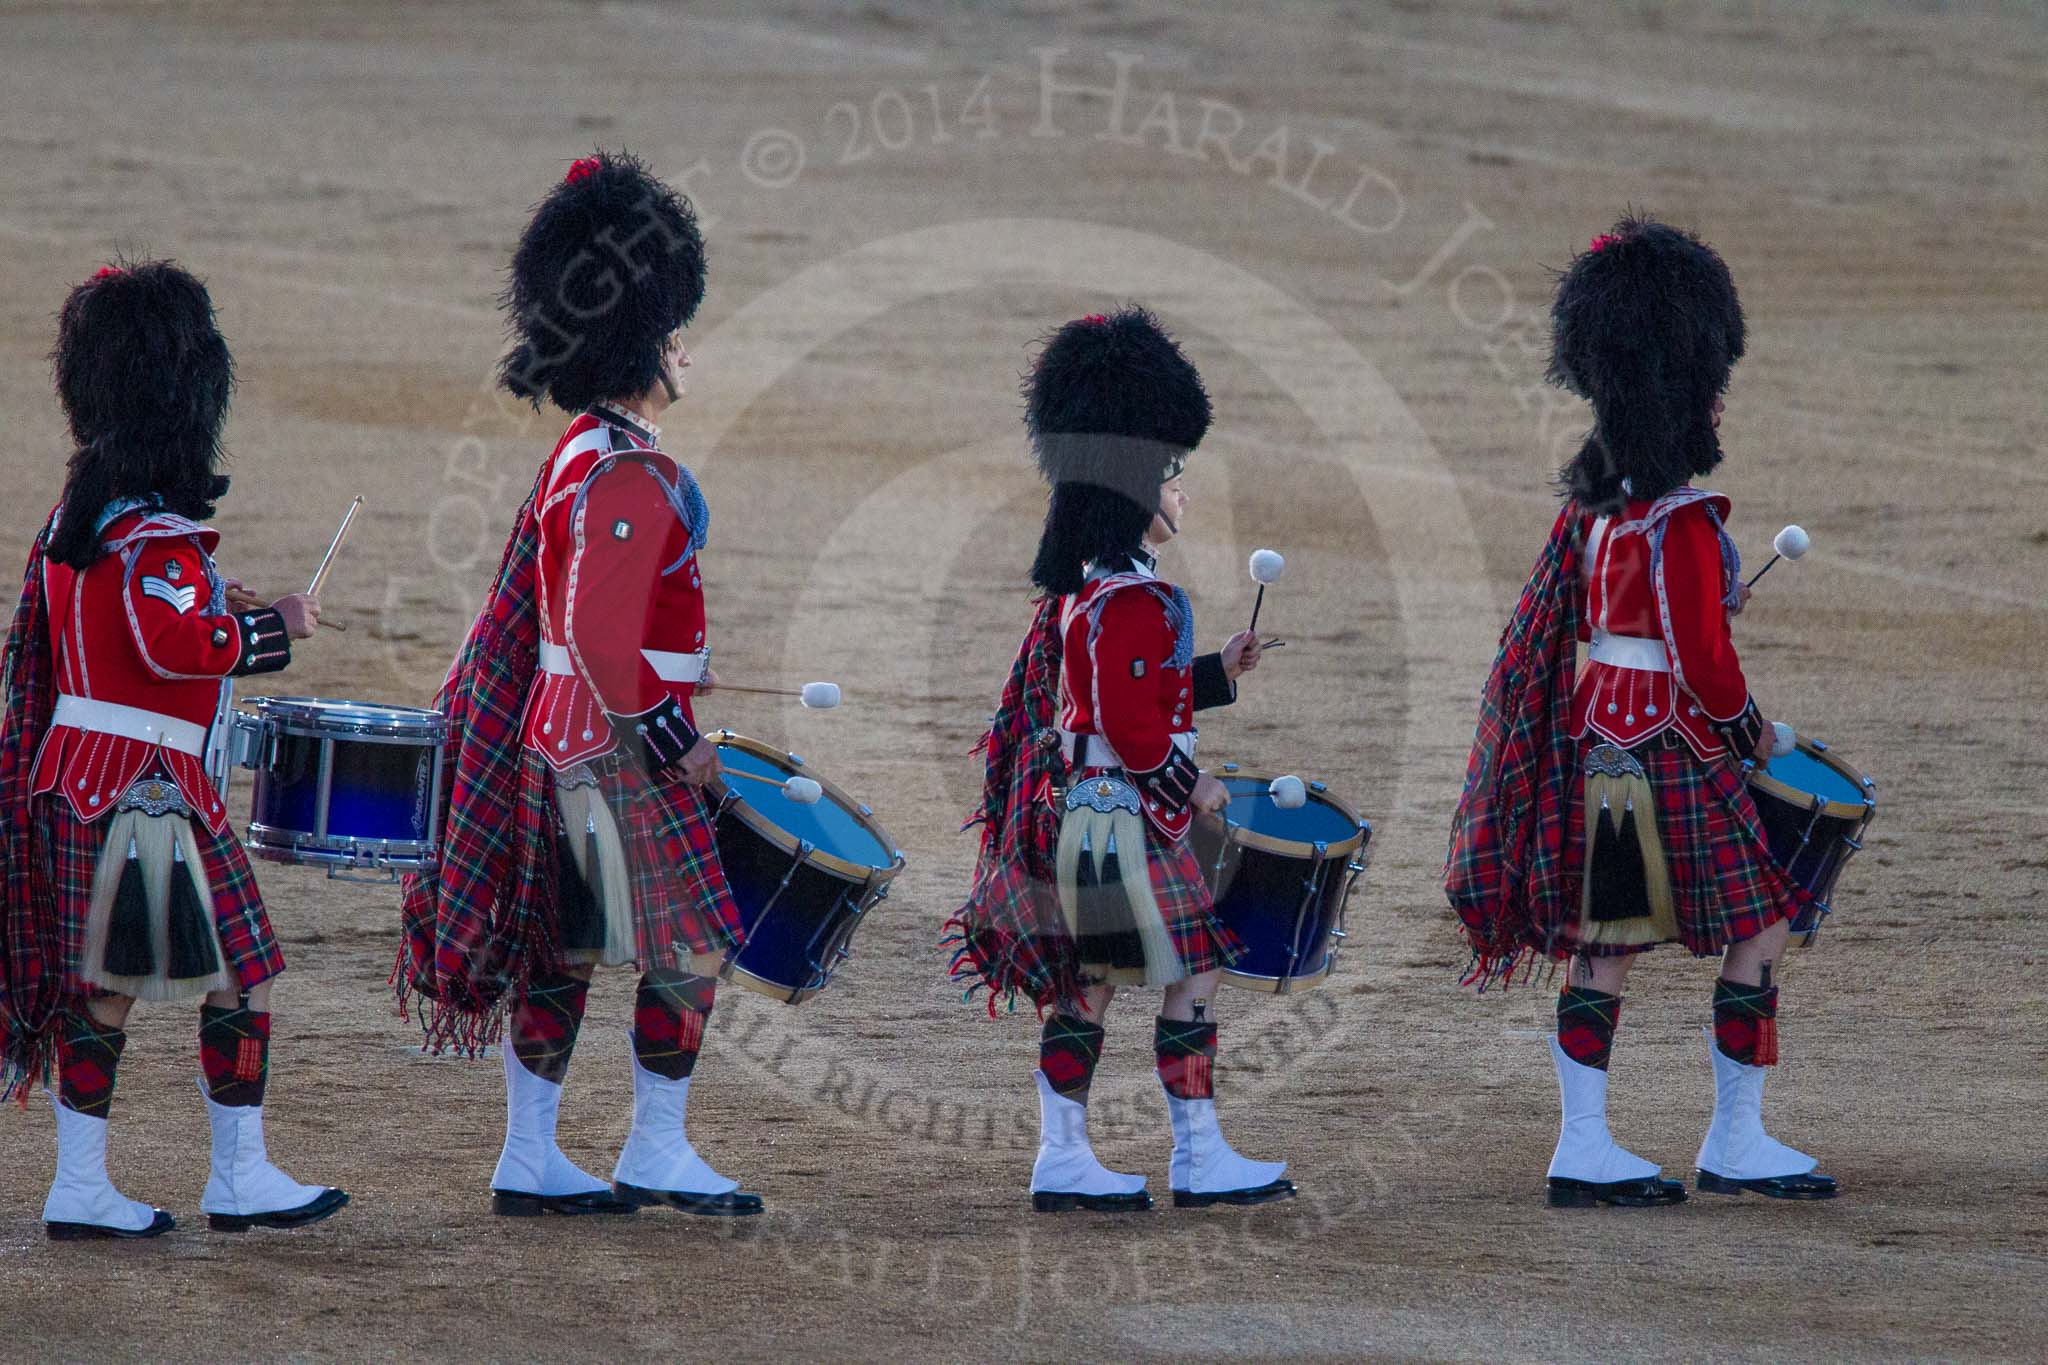 Beating Retreat 2014.
Horse Guards Parade, Westminster,
London SW1A,

United Kingdom,
on 11 June 2014 at 21:13, image #291